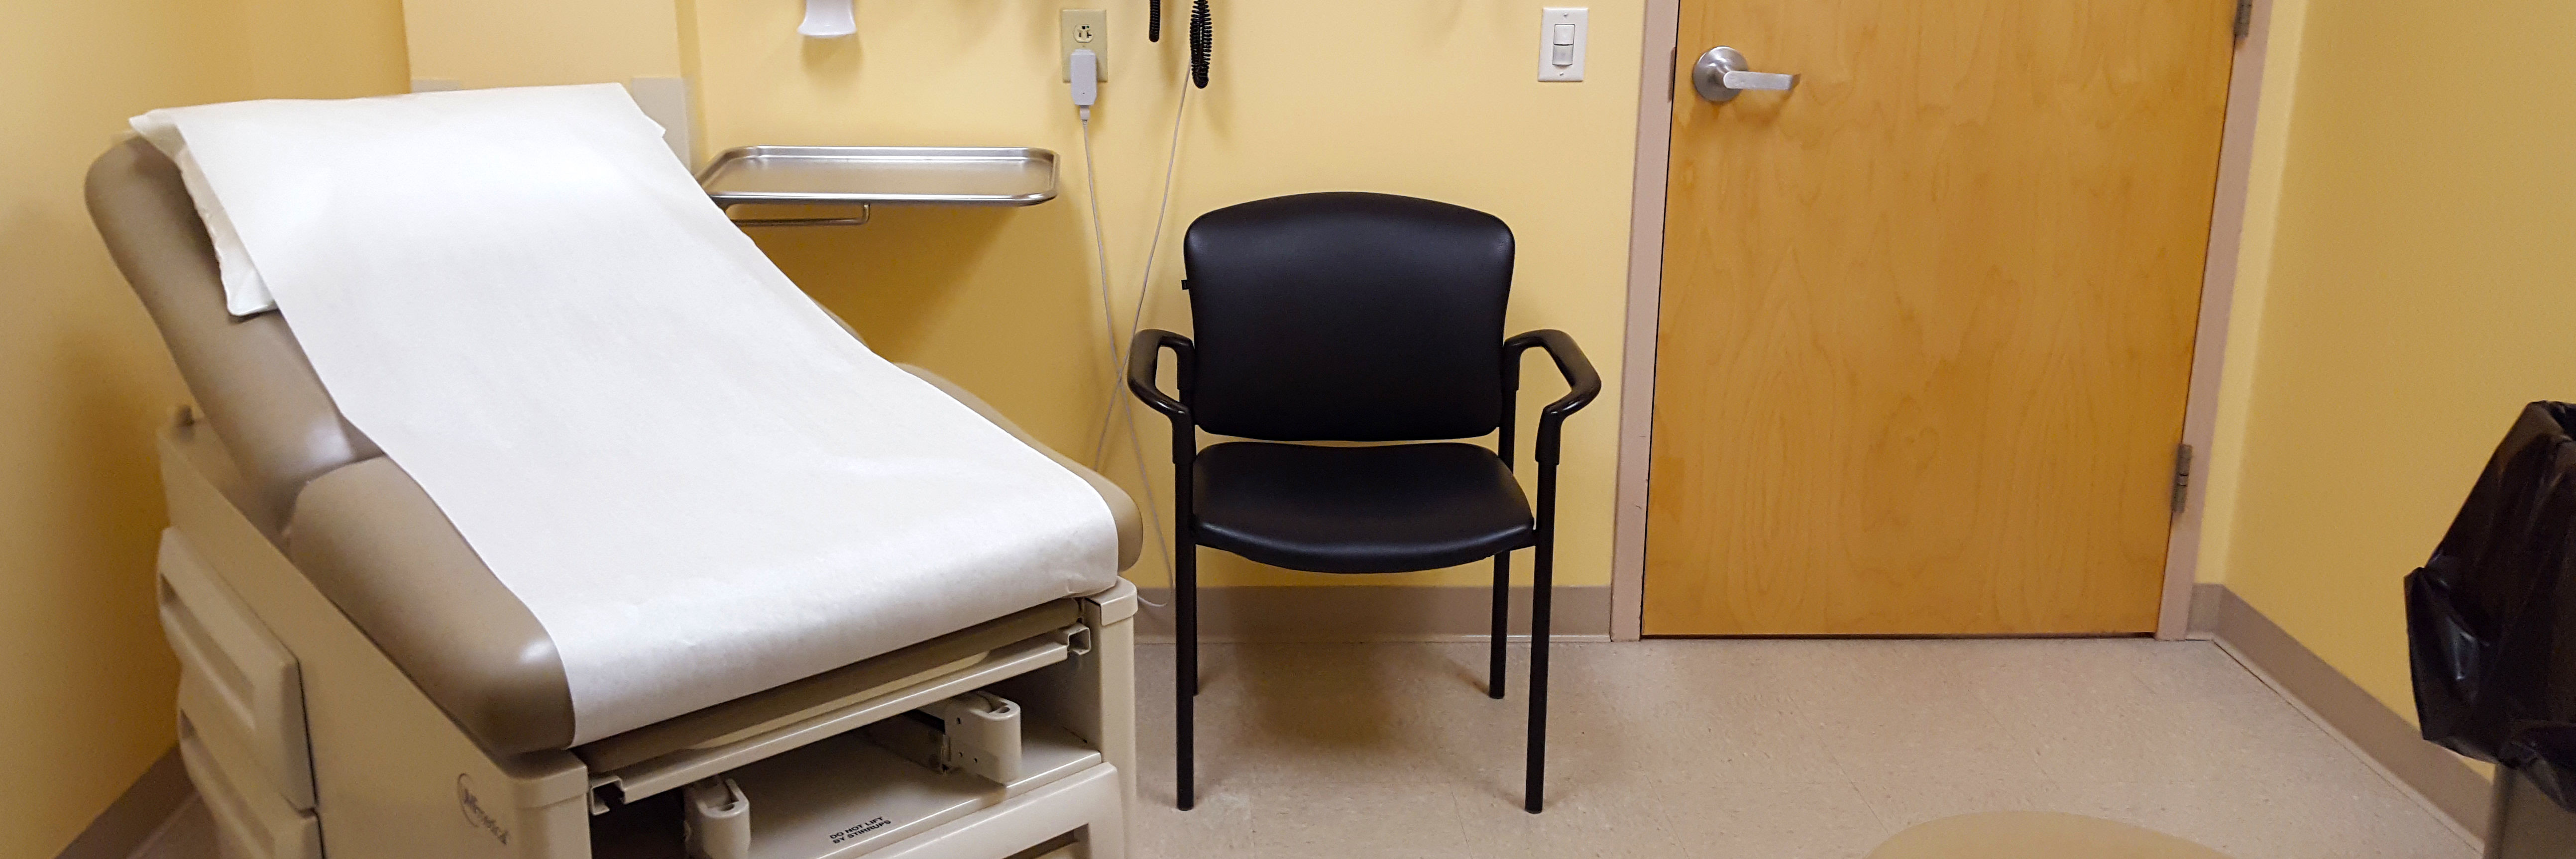 hospital room with chair and bed